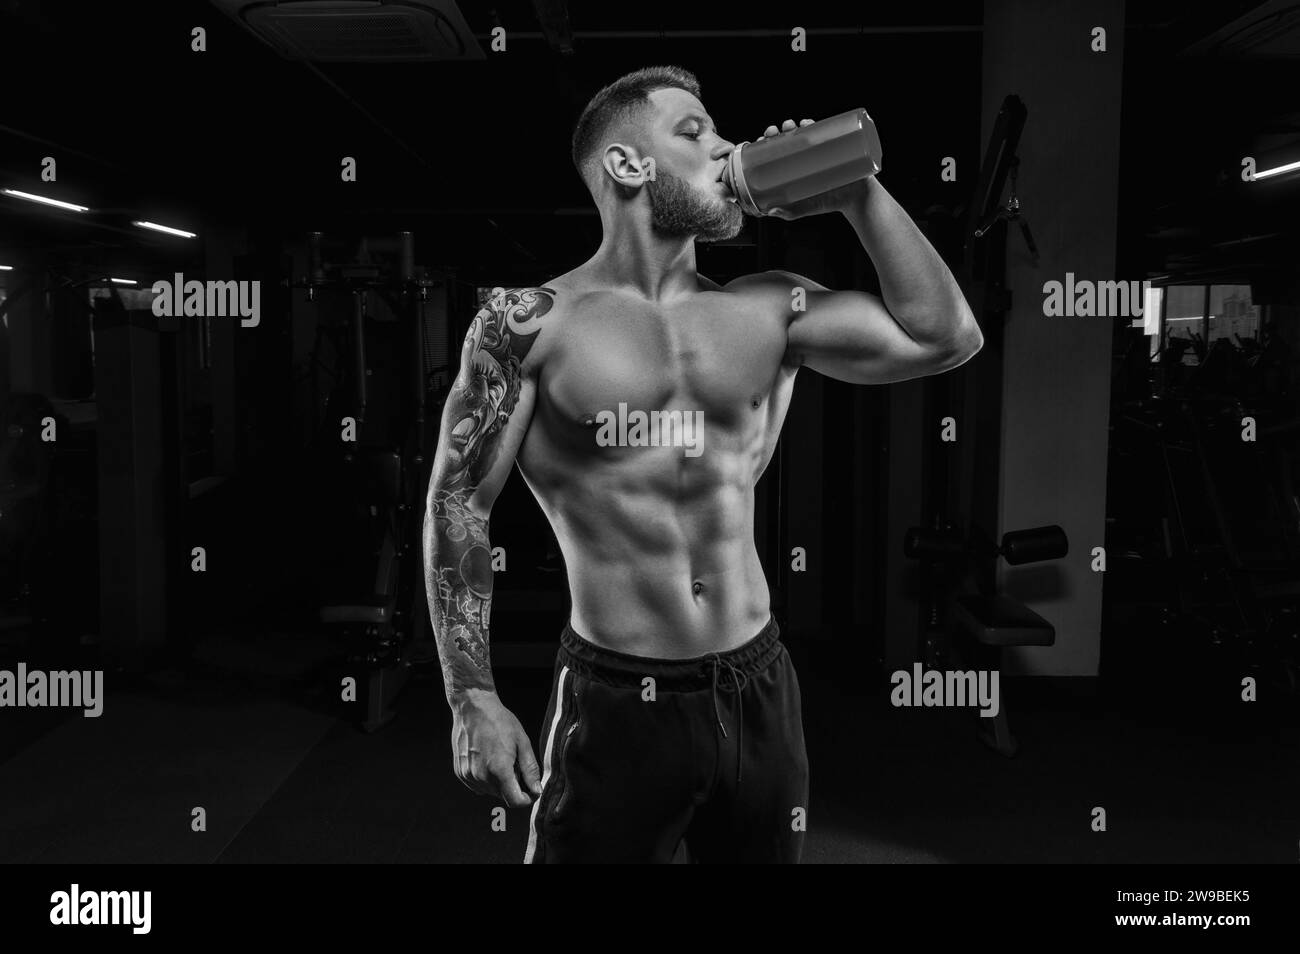 Portrait of an athlete drinking from a shaker in the gym. Bodybuilding and fitness concept. Mixed media Stock Photo